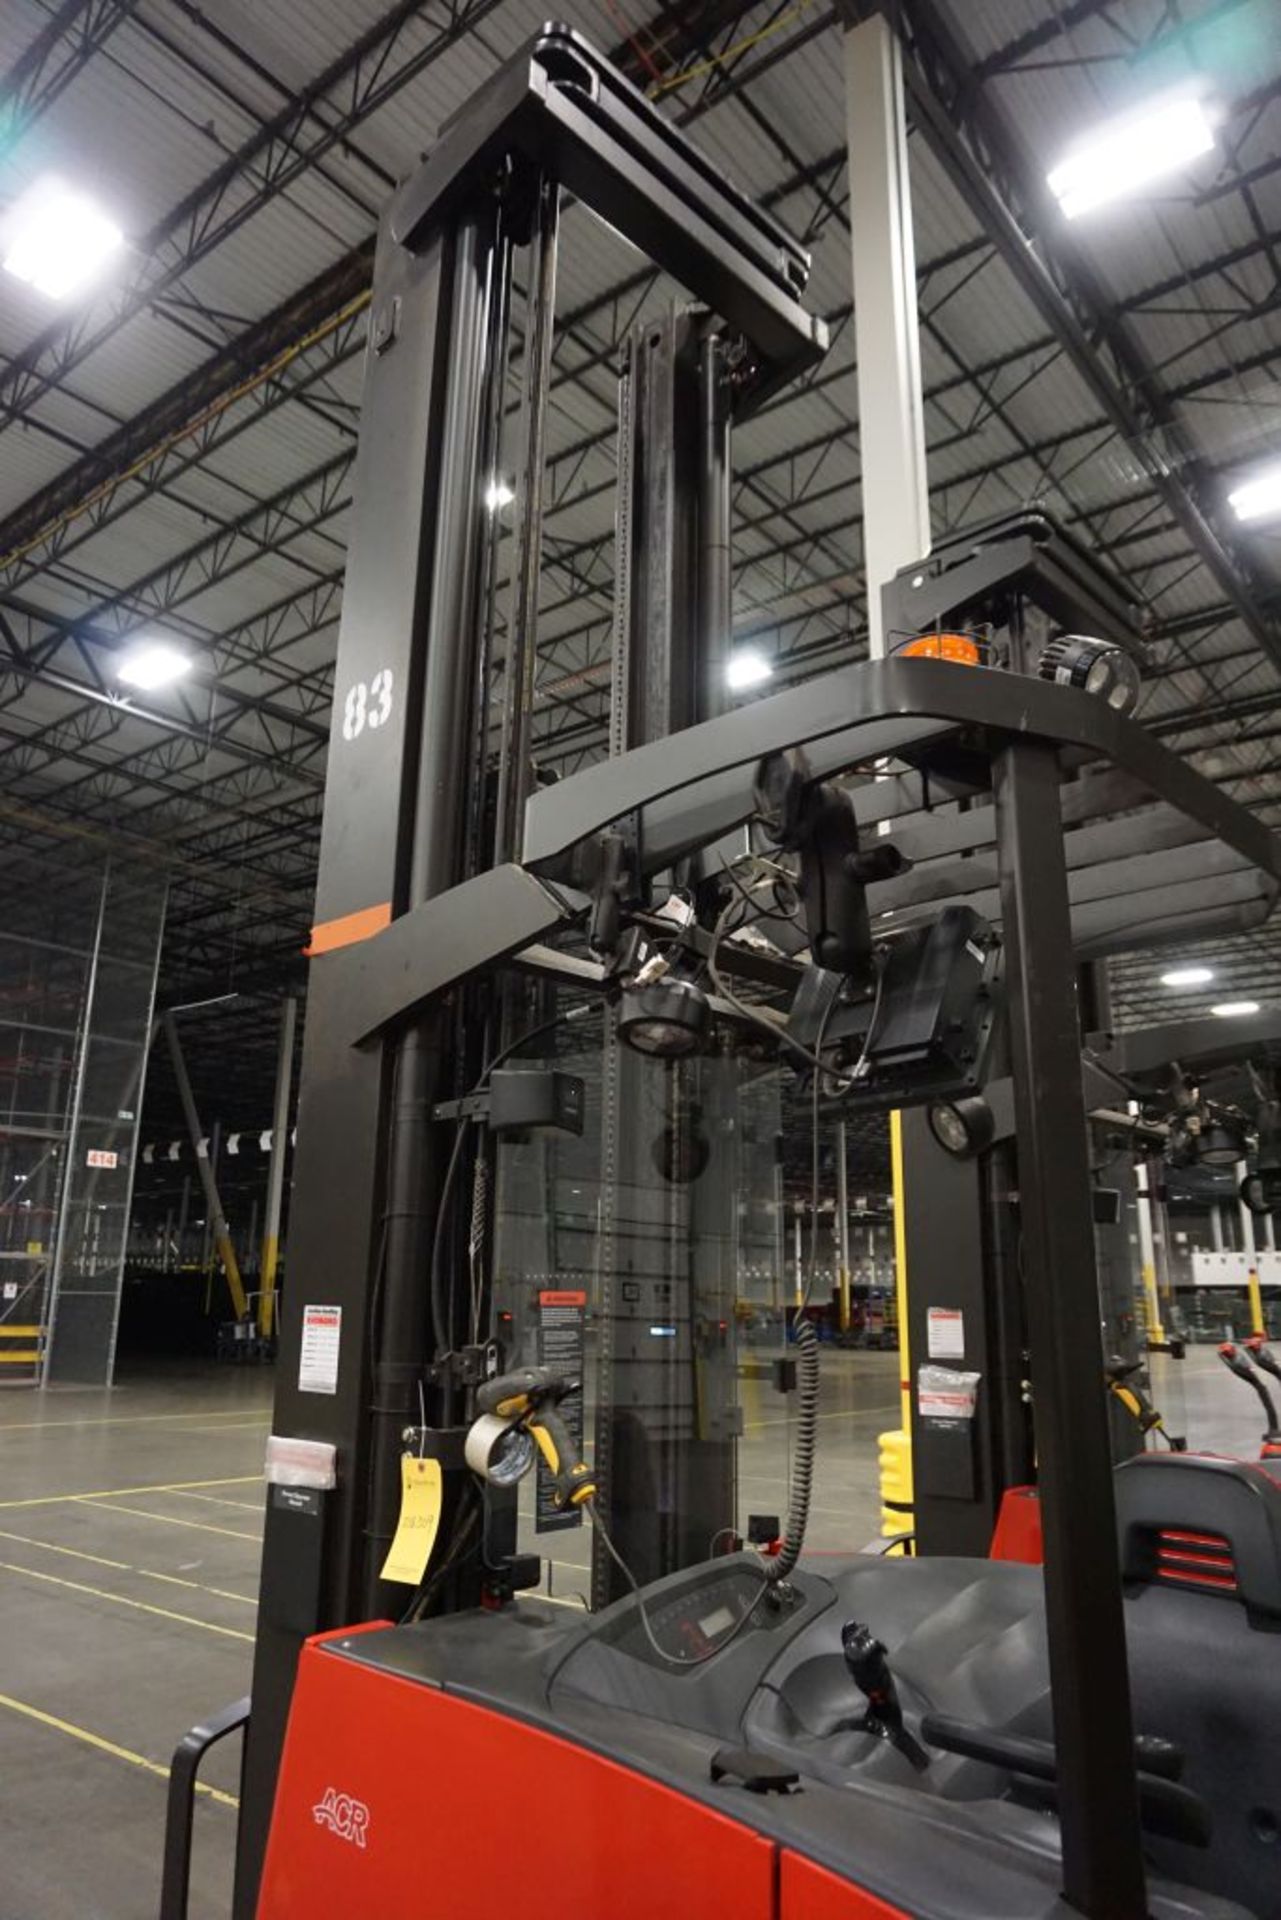 Raymond 7500 Universal Stance Reach Forklift - Model No. 750-R45TT; Serial No. 750-15-BC50725; - Image 12 of 19